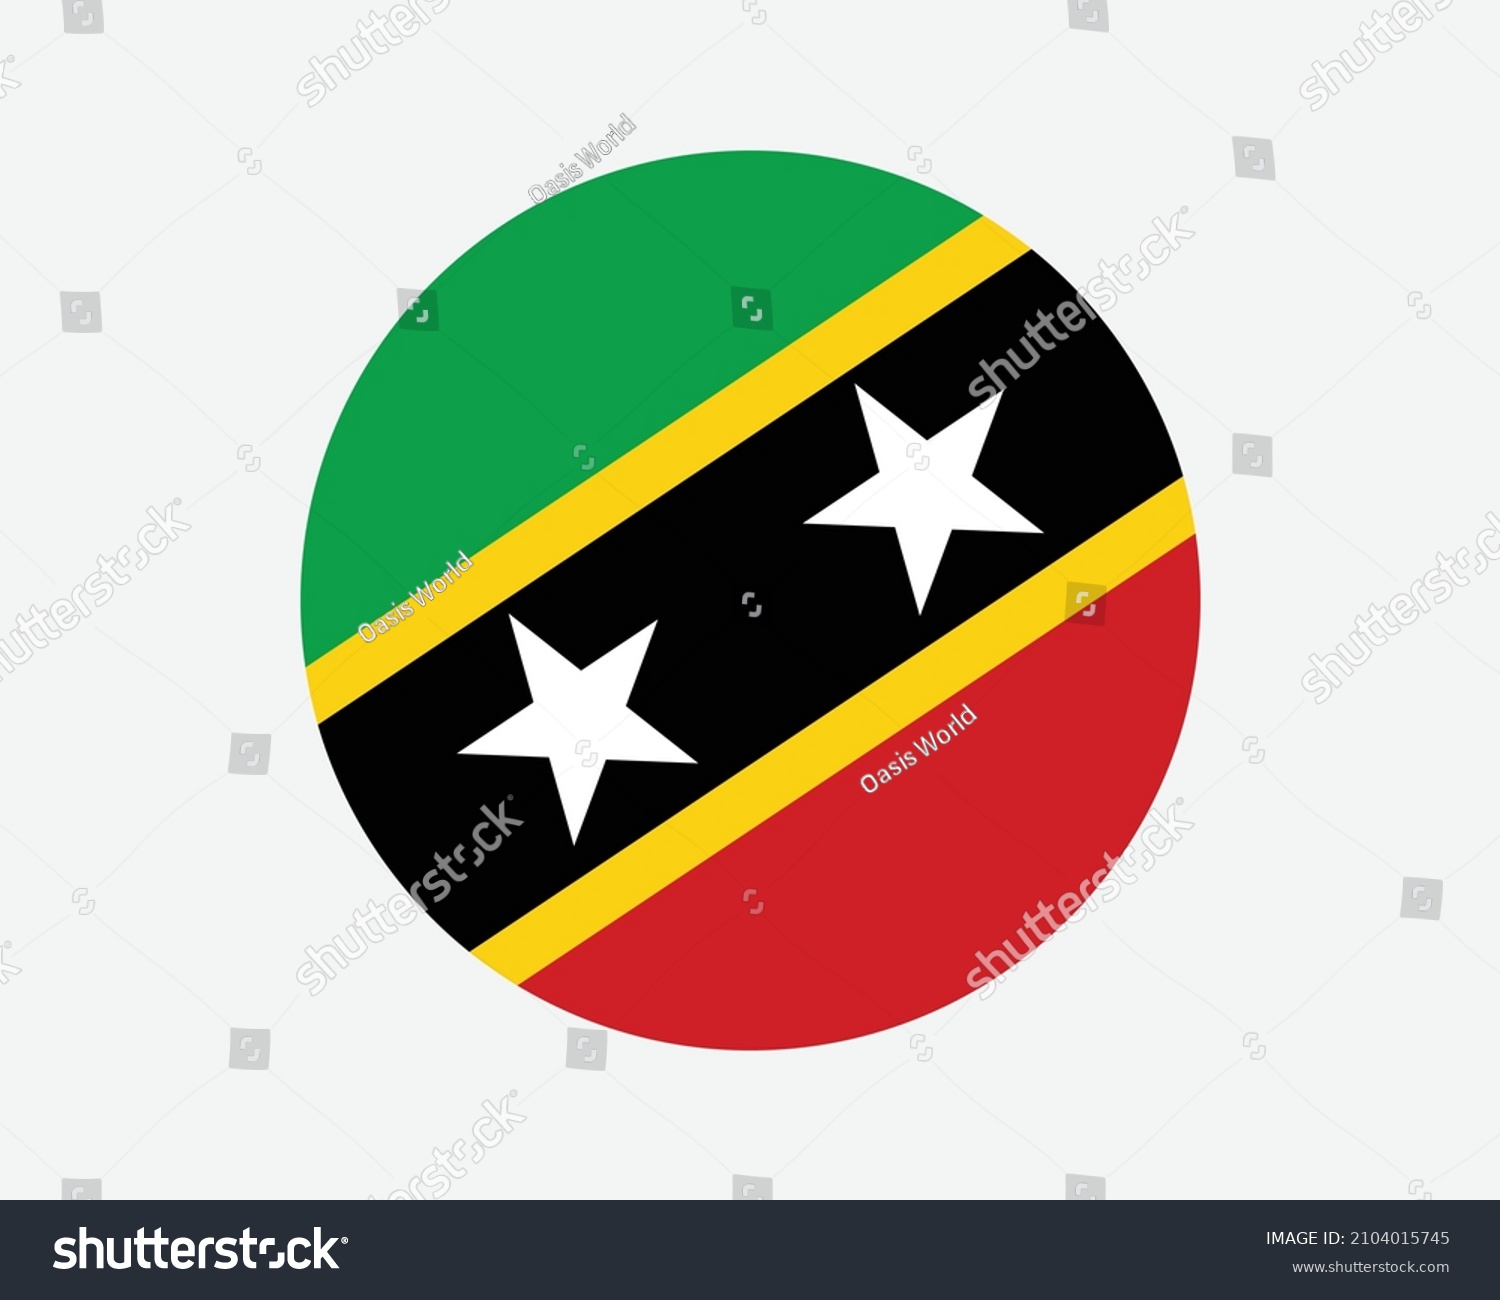 SVG of Saint Kitts and Nevis Round Country Flag. St. Kittitian and Nevisian Circle National Flag. Federation of Saint Christopher and Nevis Circular Shape Button Banner. EPS Vector Illustration. svg